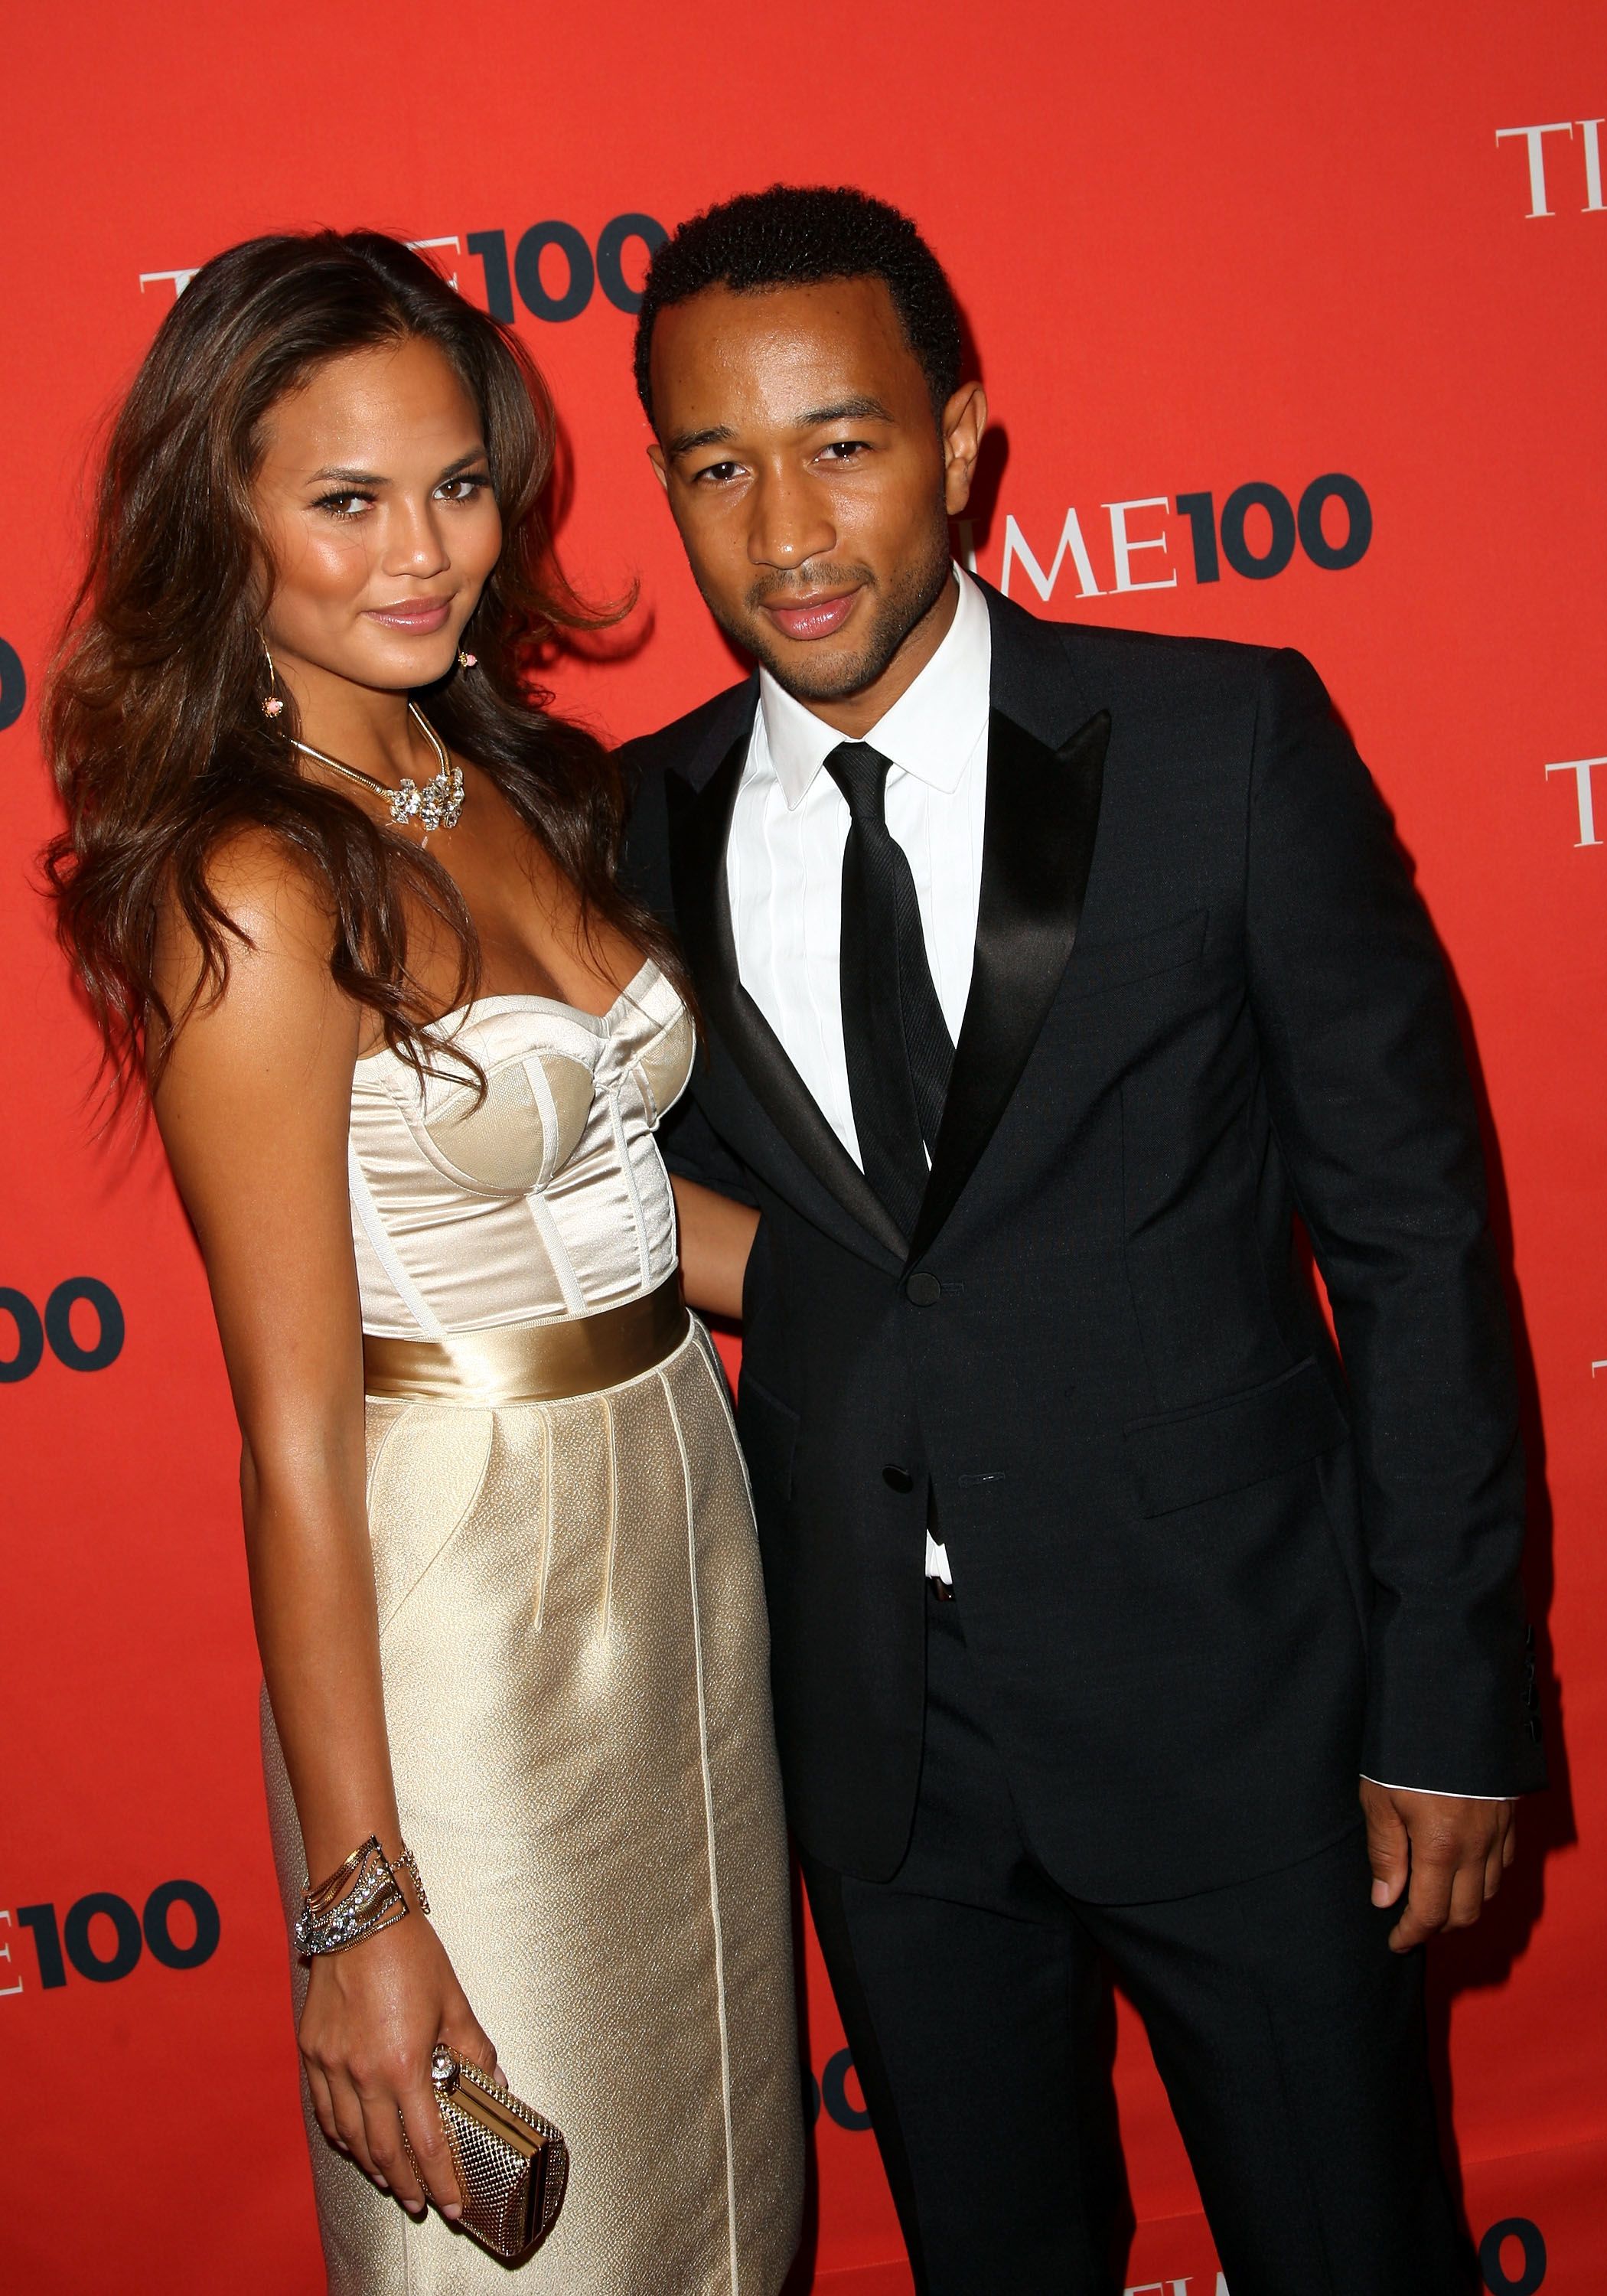 John Legend and Chrissy Teigen during Time's 100 Most Influential People in the World Gala at the Frederick P. Rose Hall at Jazz at Lincoln Center on May 5, 2009 in New York City.  | Source: Getty Images